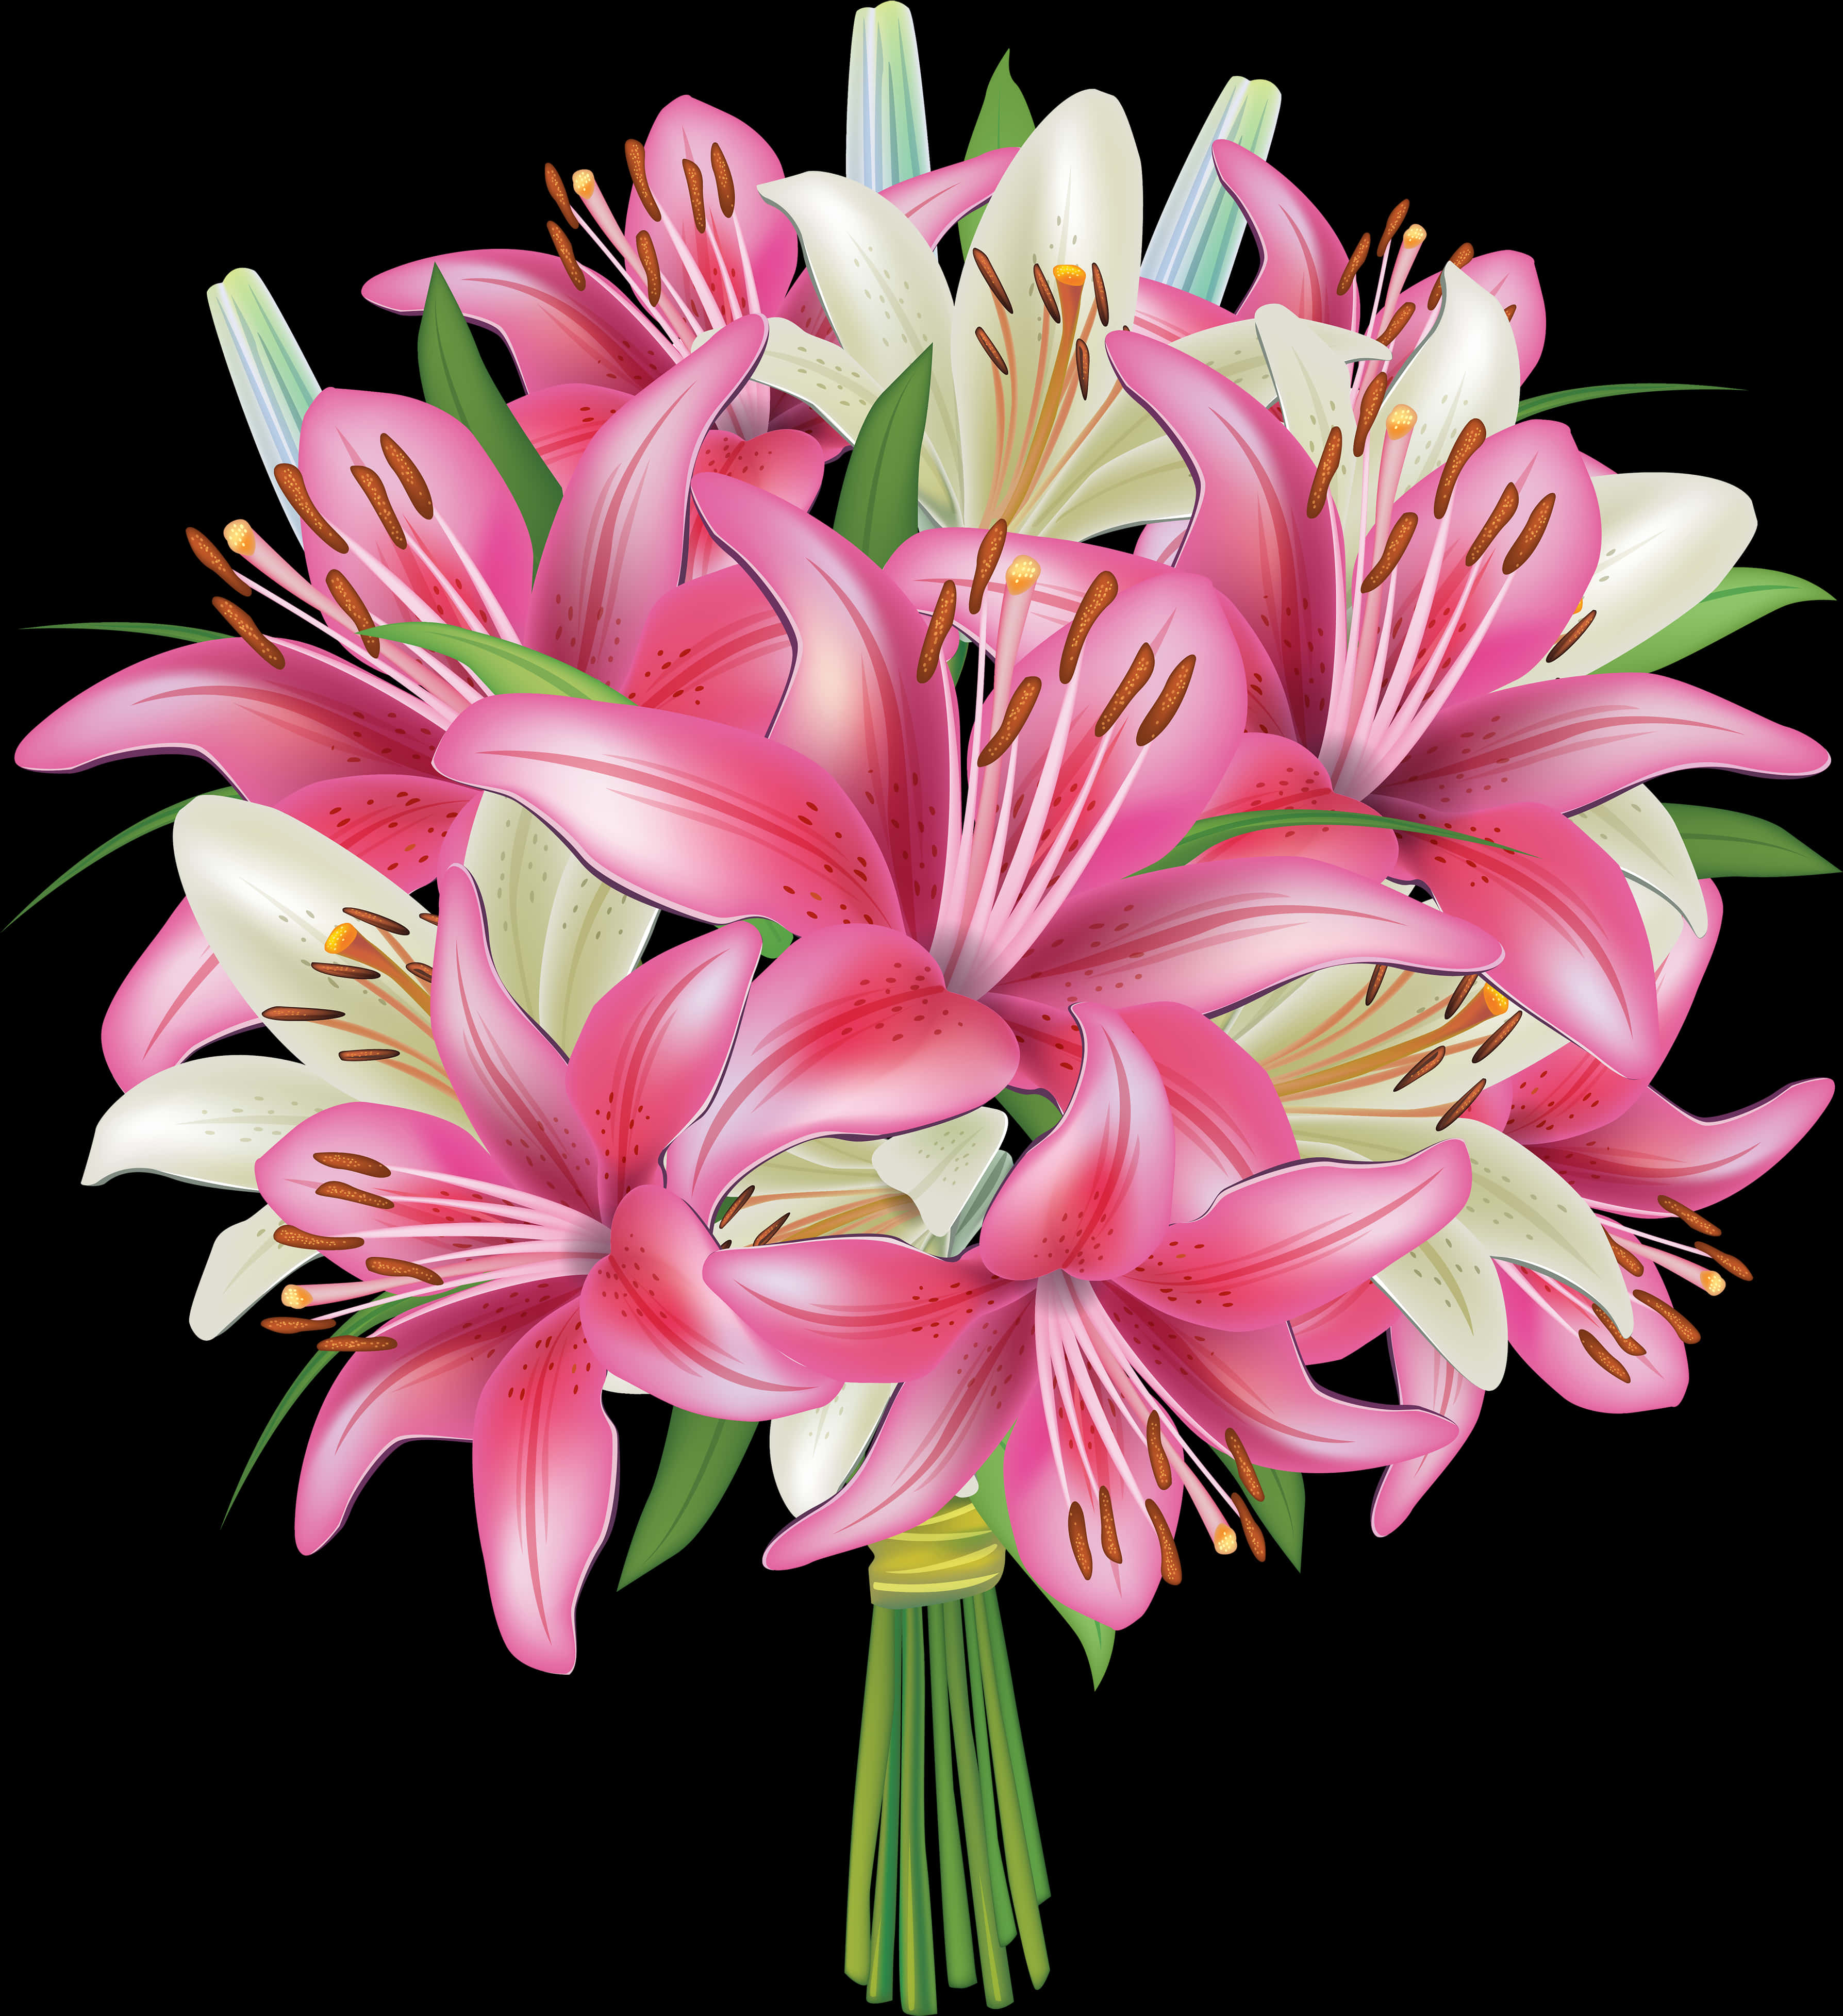 A Bouquet Of Pink And White Flowers